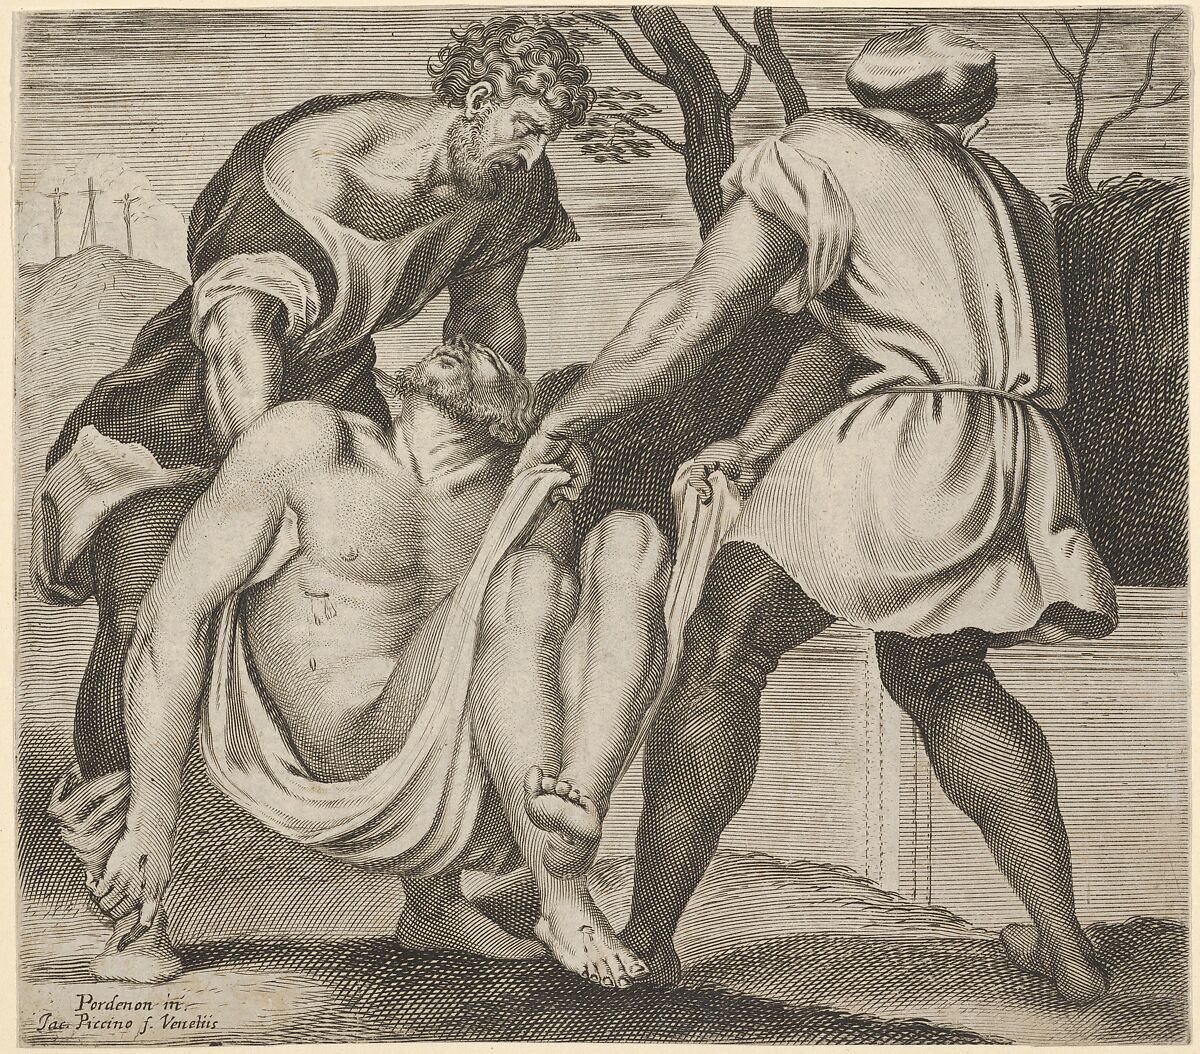 Entombment of Christ, two men lifting Christ into a tomb, with a shroud underneath the body, three crosses on Golgotha beyond, from a series of five engravings after the destroyed or detached frescoes of 1532/33 by Giovanni Antonio da Pordenone in the cloister of S.Stefano, Venice, Giacomo Piccini (Italian, born Venice, ca. 1617), Engraving 